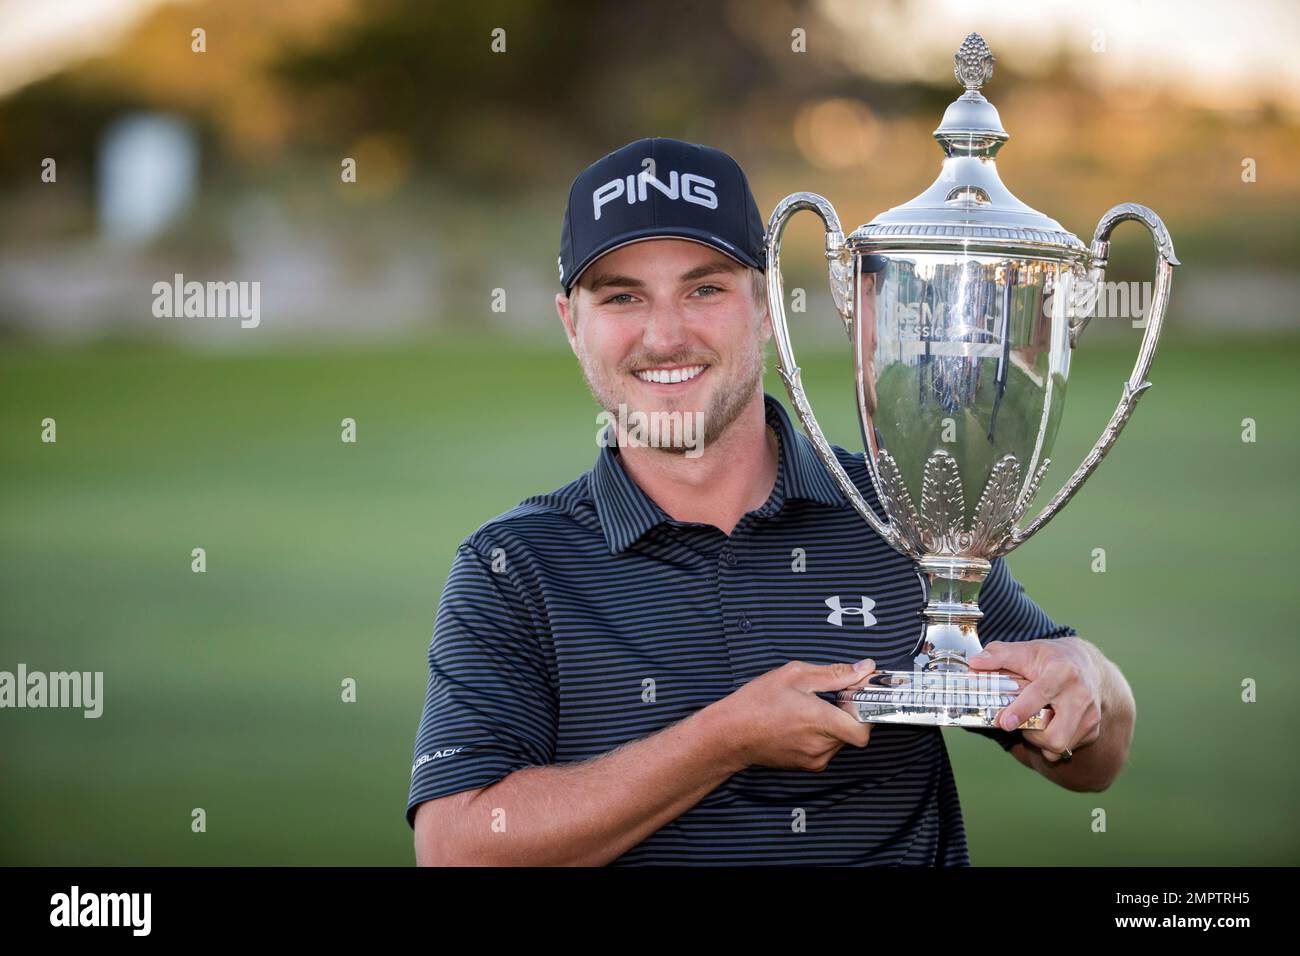 Austin Cook holds the trophy on the 18th green after winning the final round of the RSM Classic golf tournament on Sunday, Nov. 19, 2017, in St